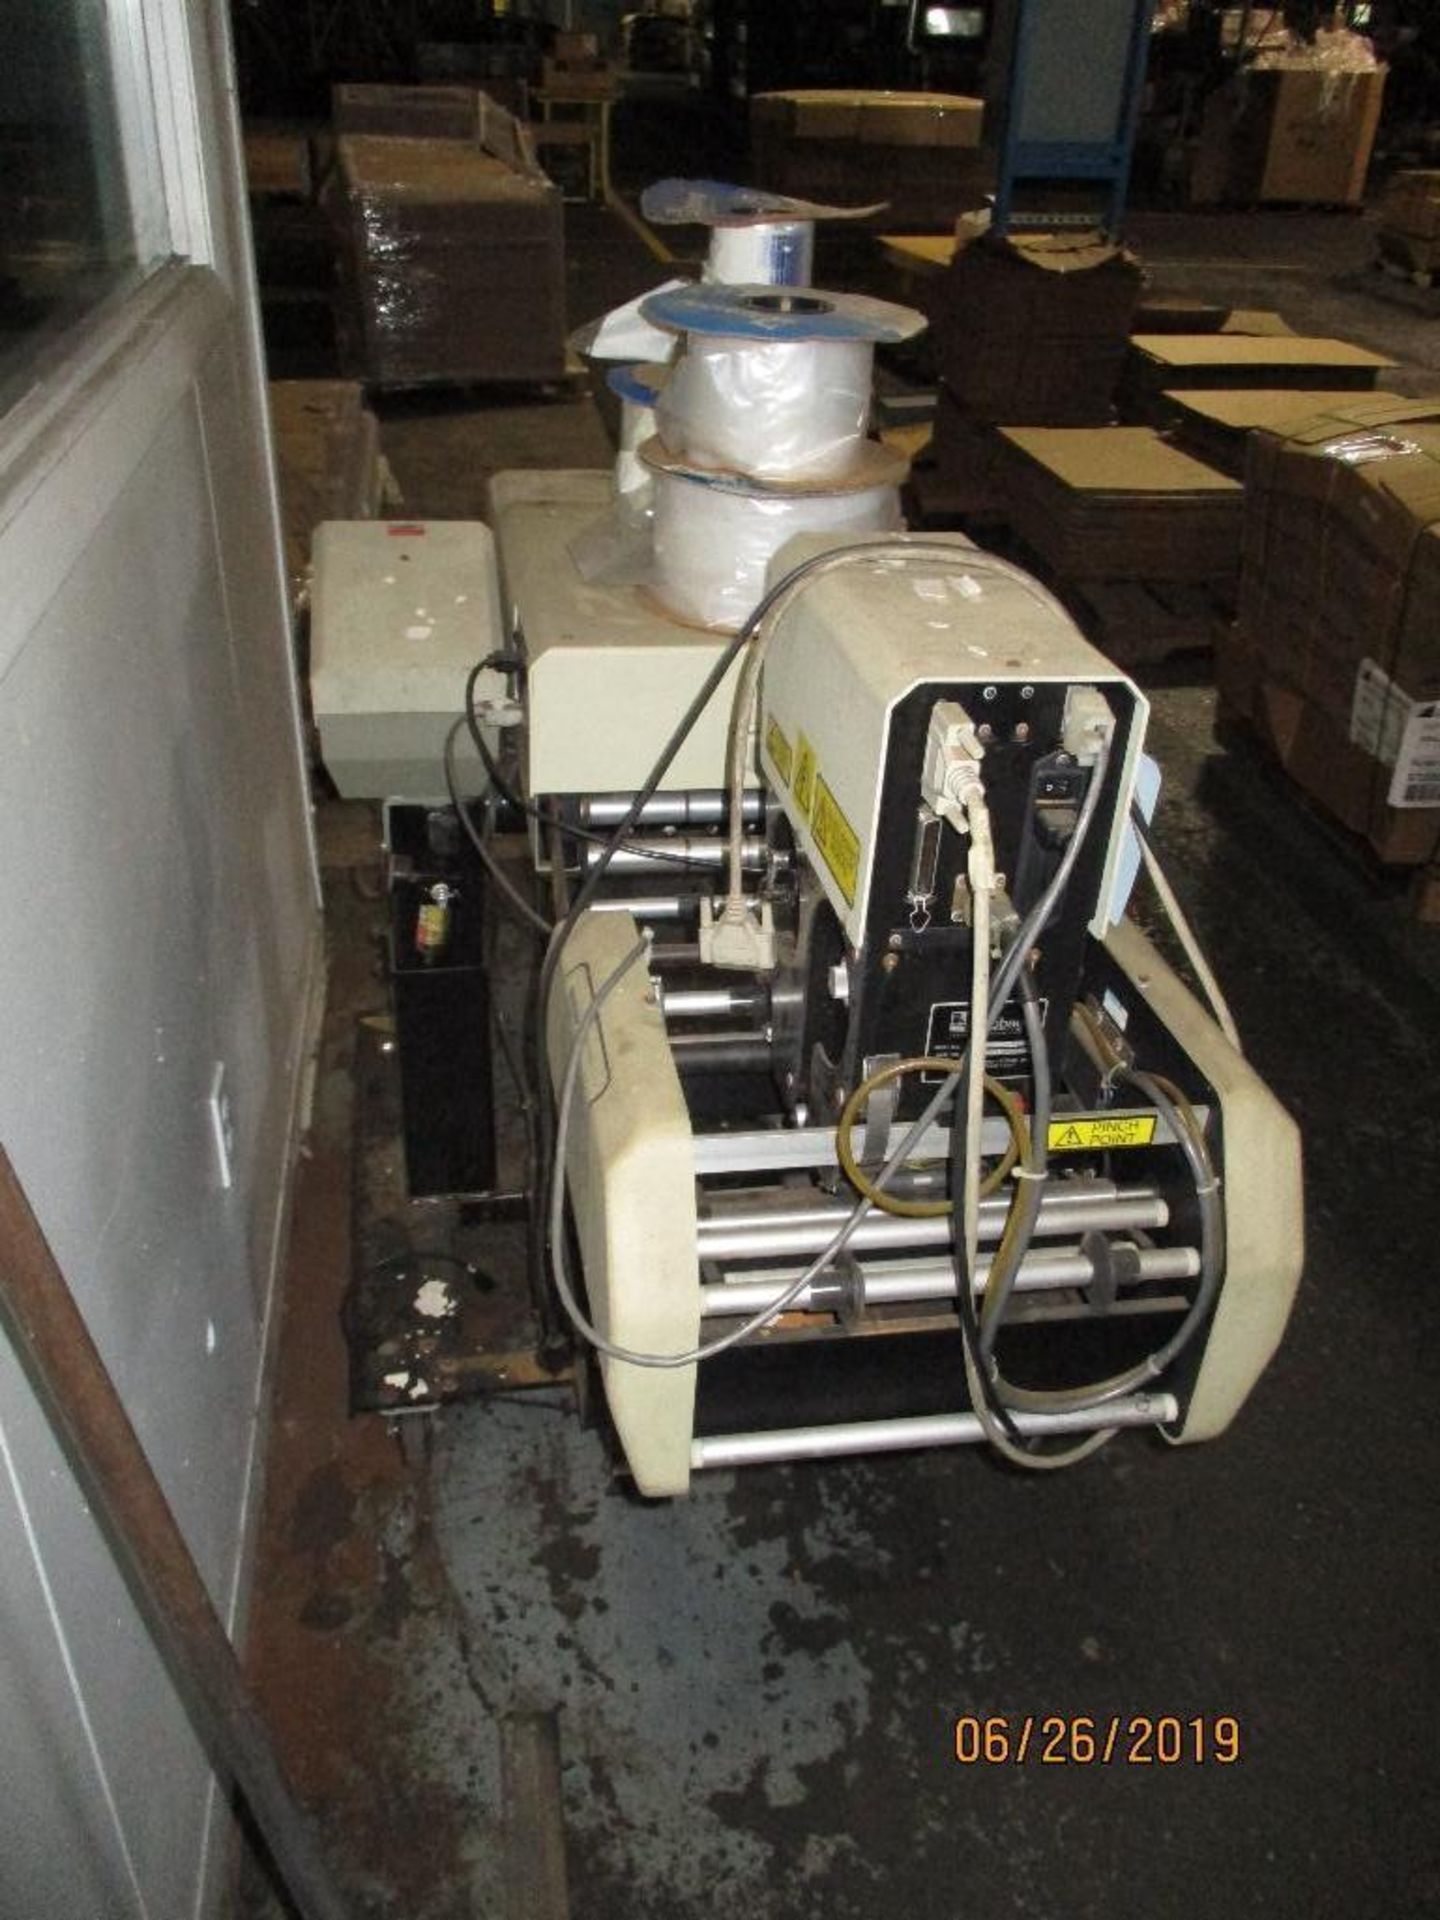 HS-100 Excel Auto Bag Machine S/N 98-12X6-3334 With PI-4000 Auto Label Attached, Located at 800 West - Image 4 of 4